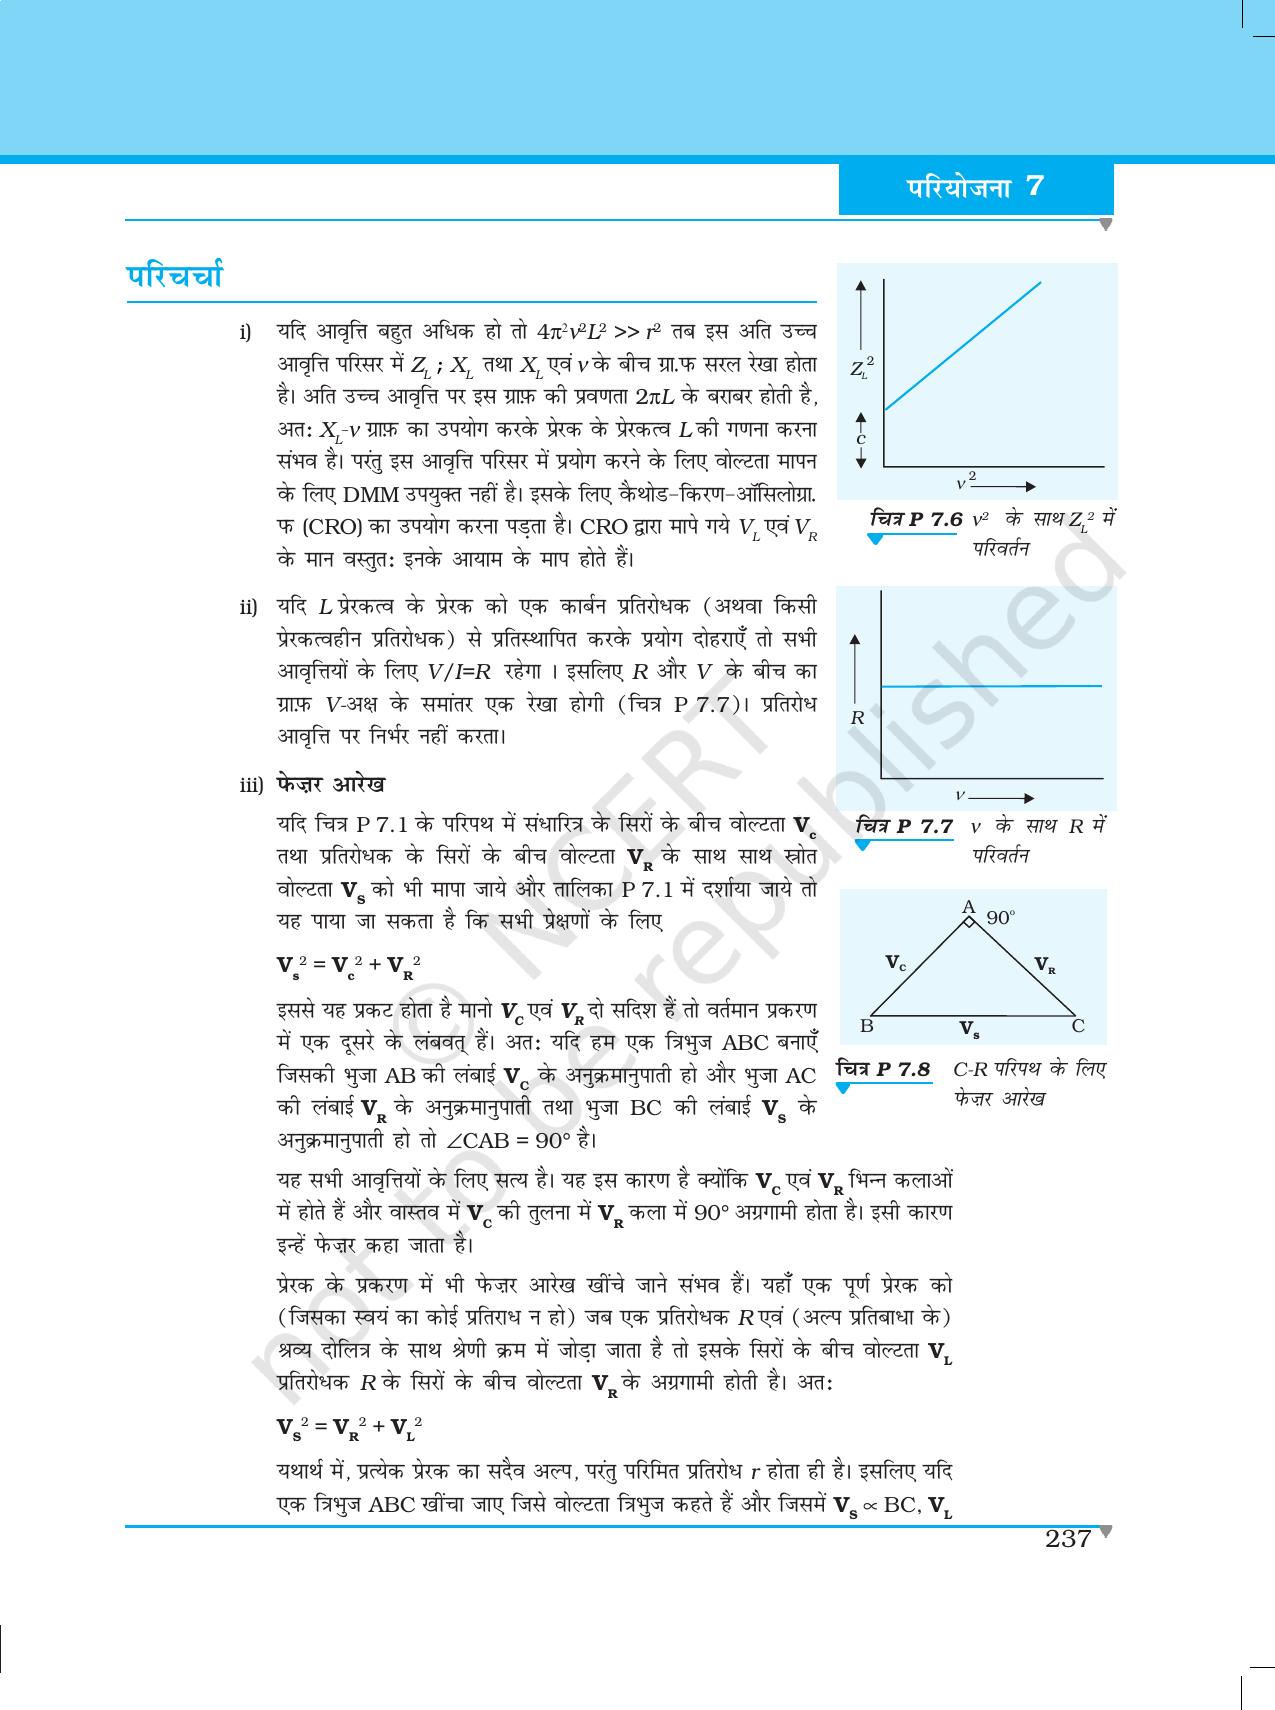 NCERT Laboratory Manuals for Class XII भौतिकी - परियोजना (1 - 7) - Page 31